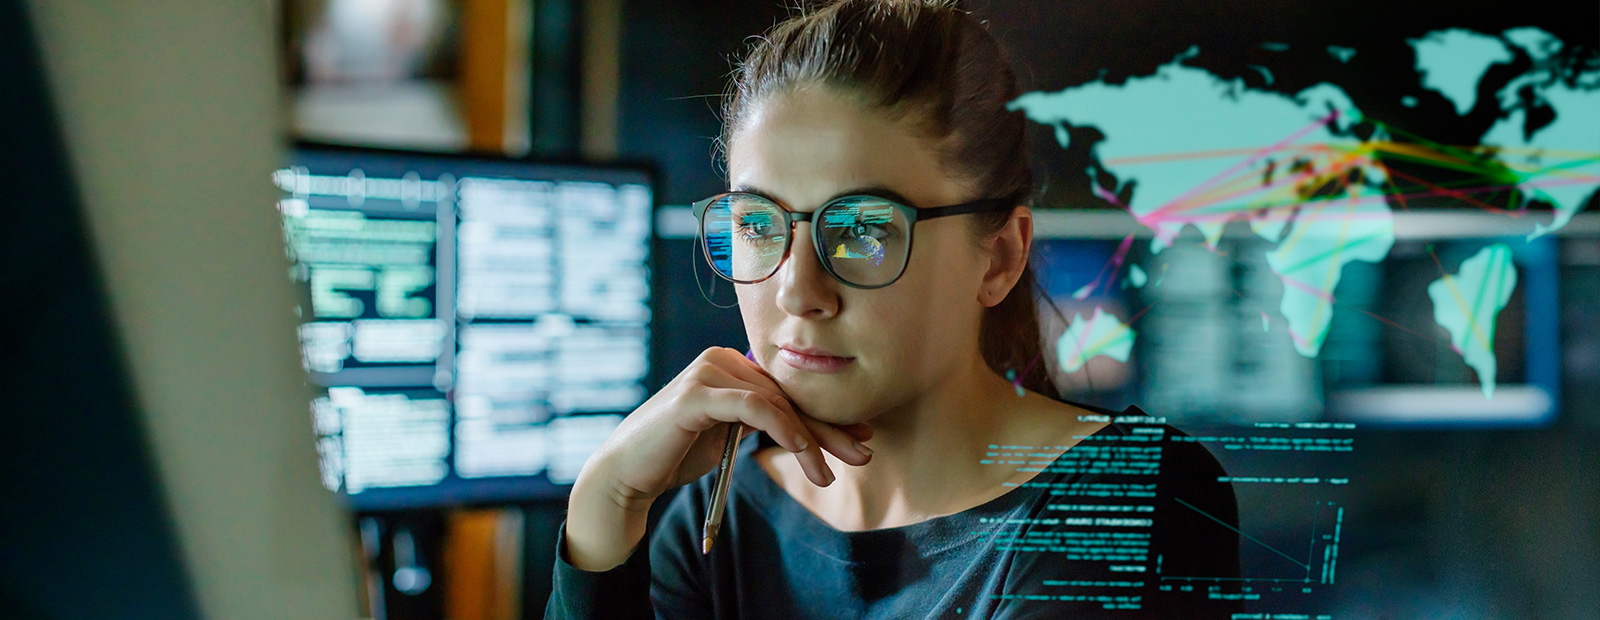 young woman wearing glasses surrounded by computer monitors in a dark office